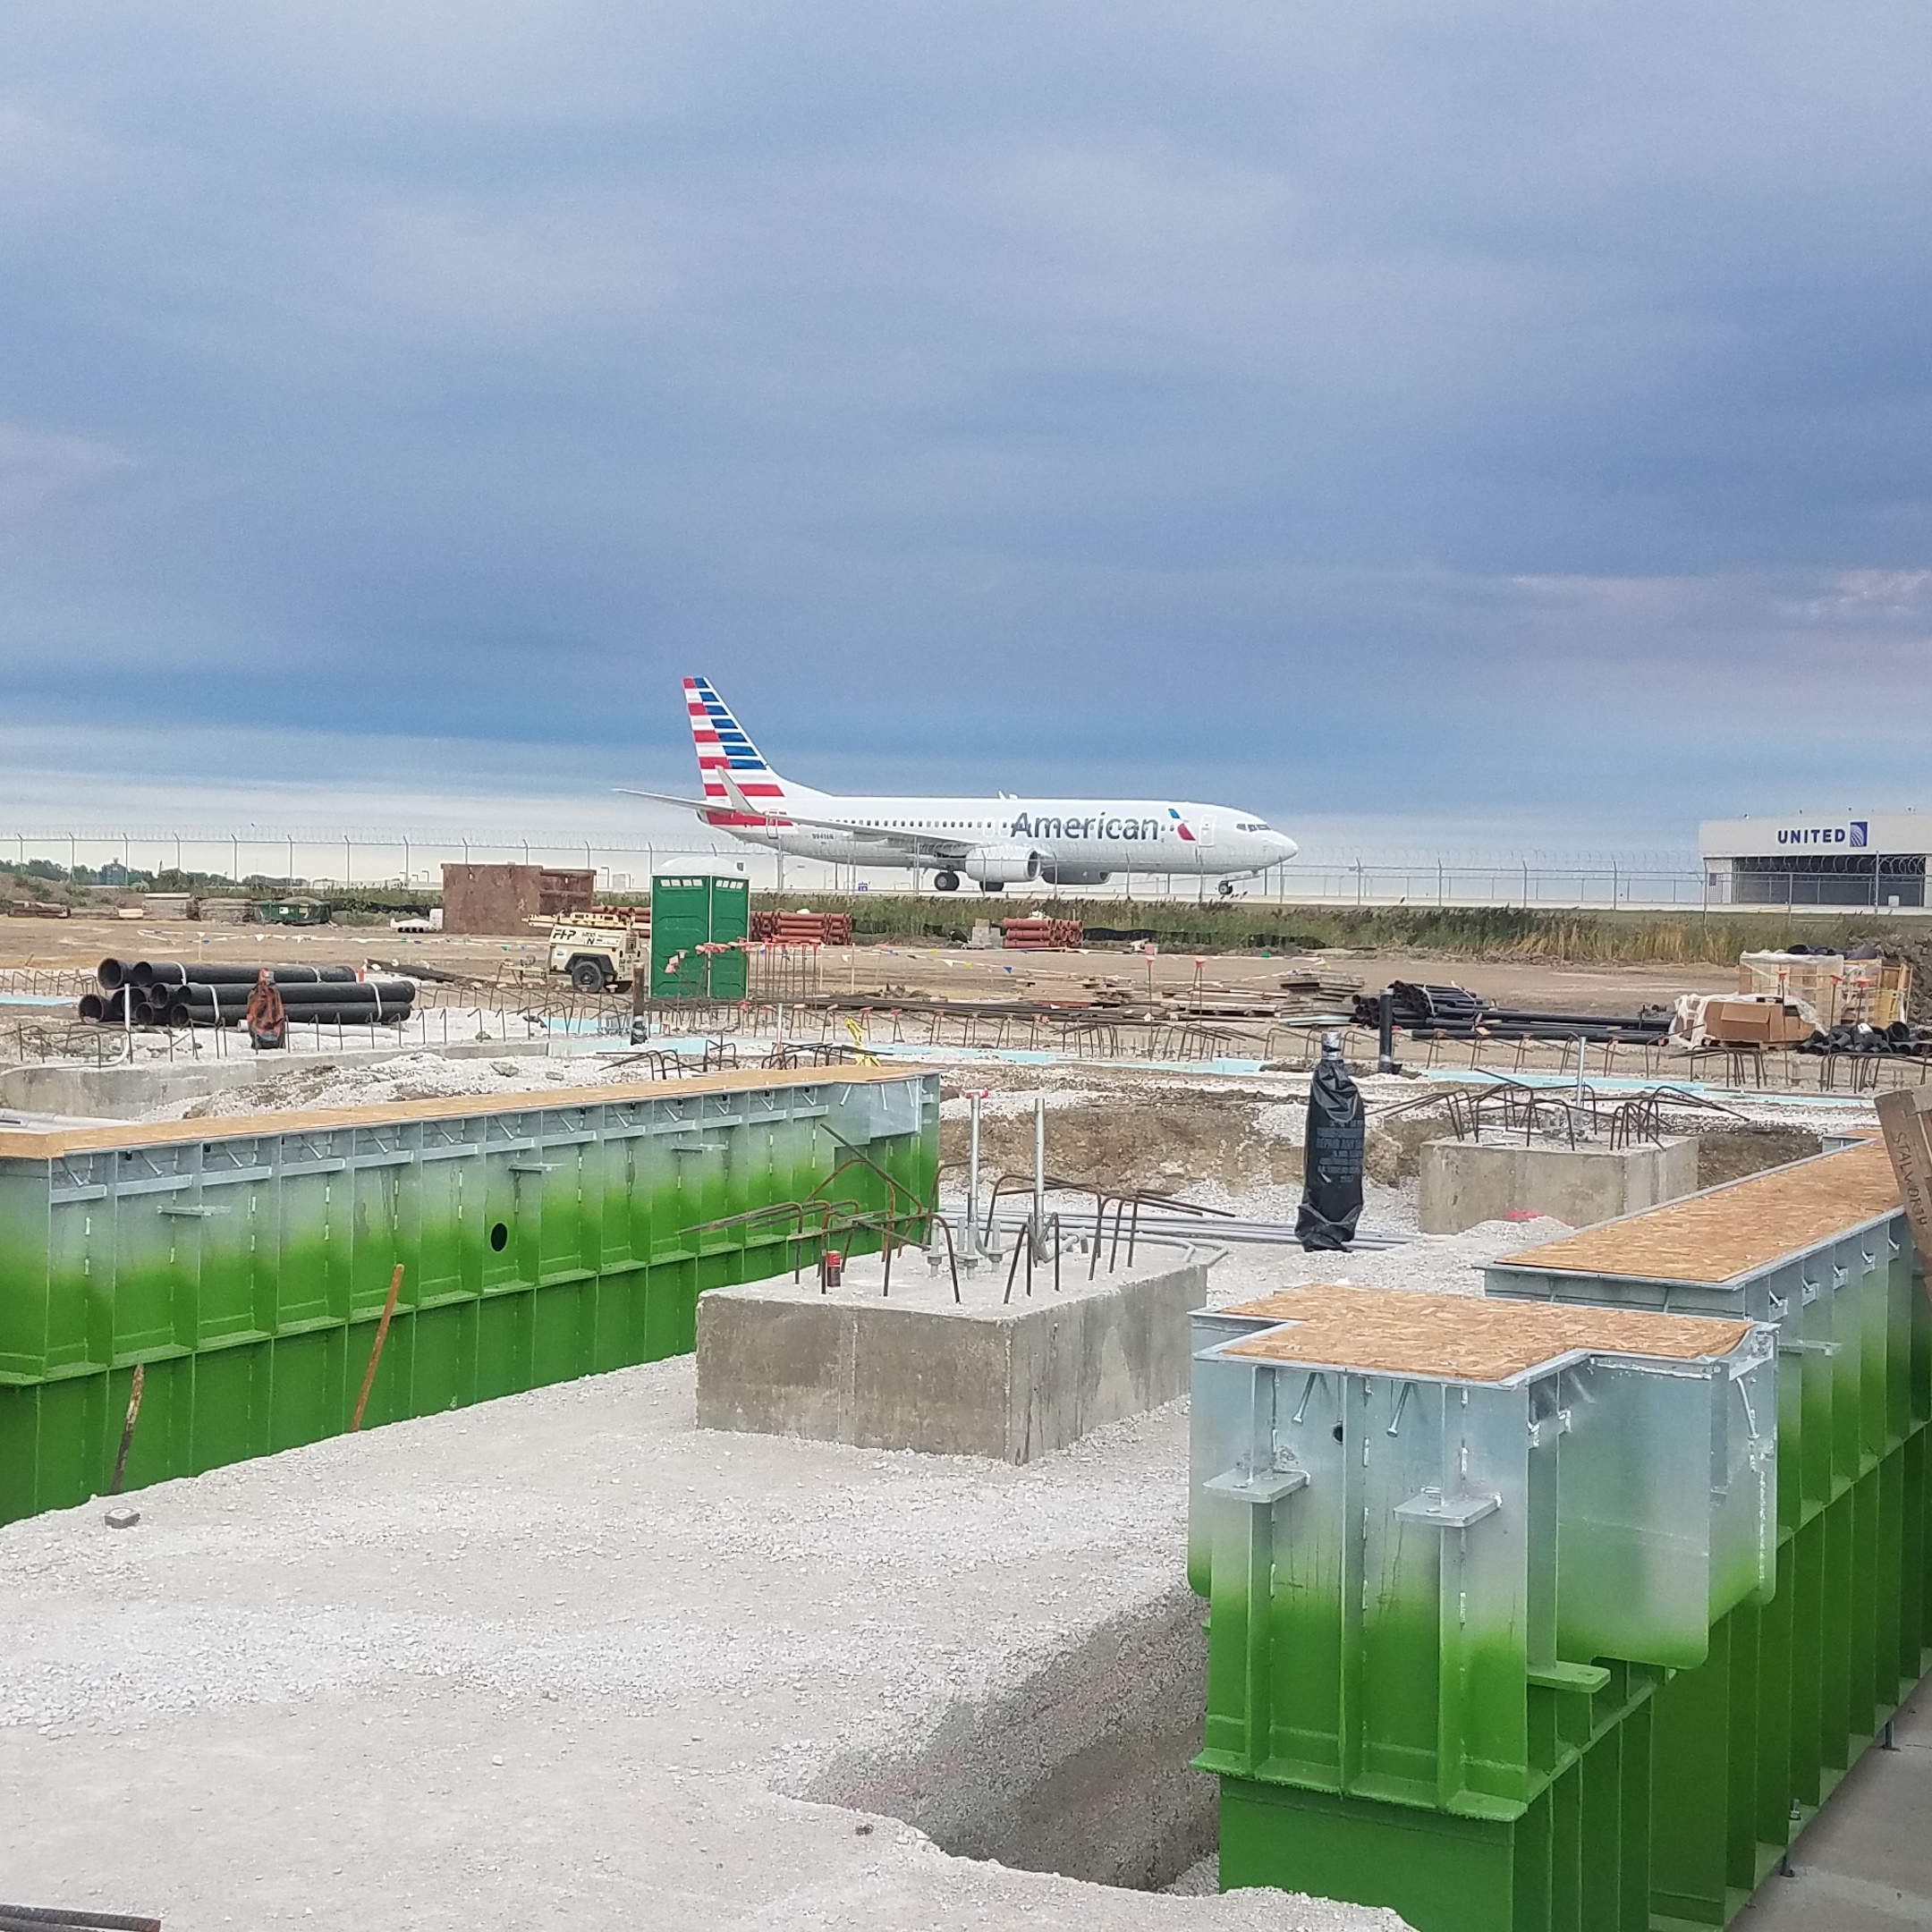 American Airlines Selects Stertil-Koni DIAMONDLIFTs for new maintenance facility at O'Hare International Airport, Chicago